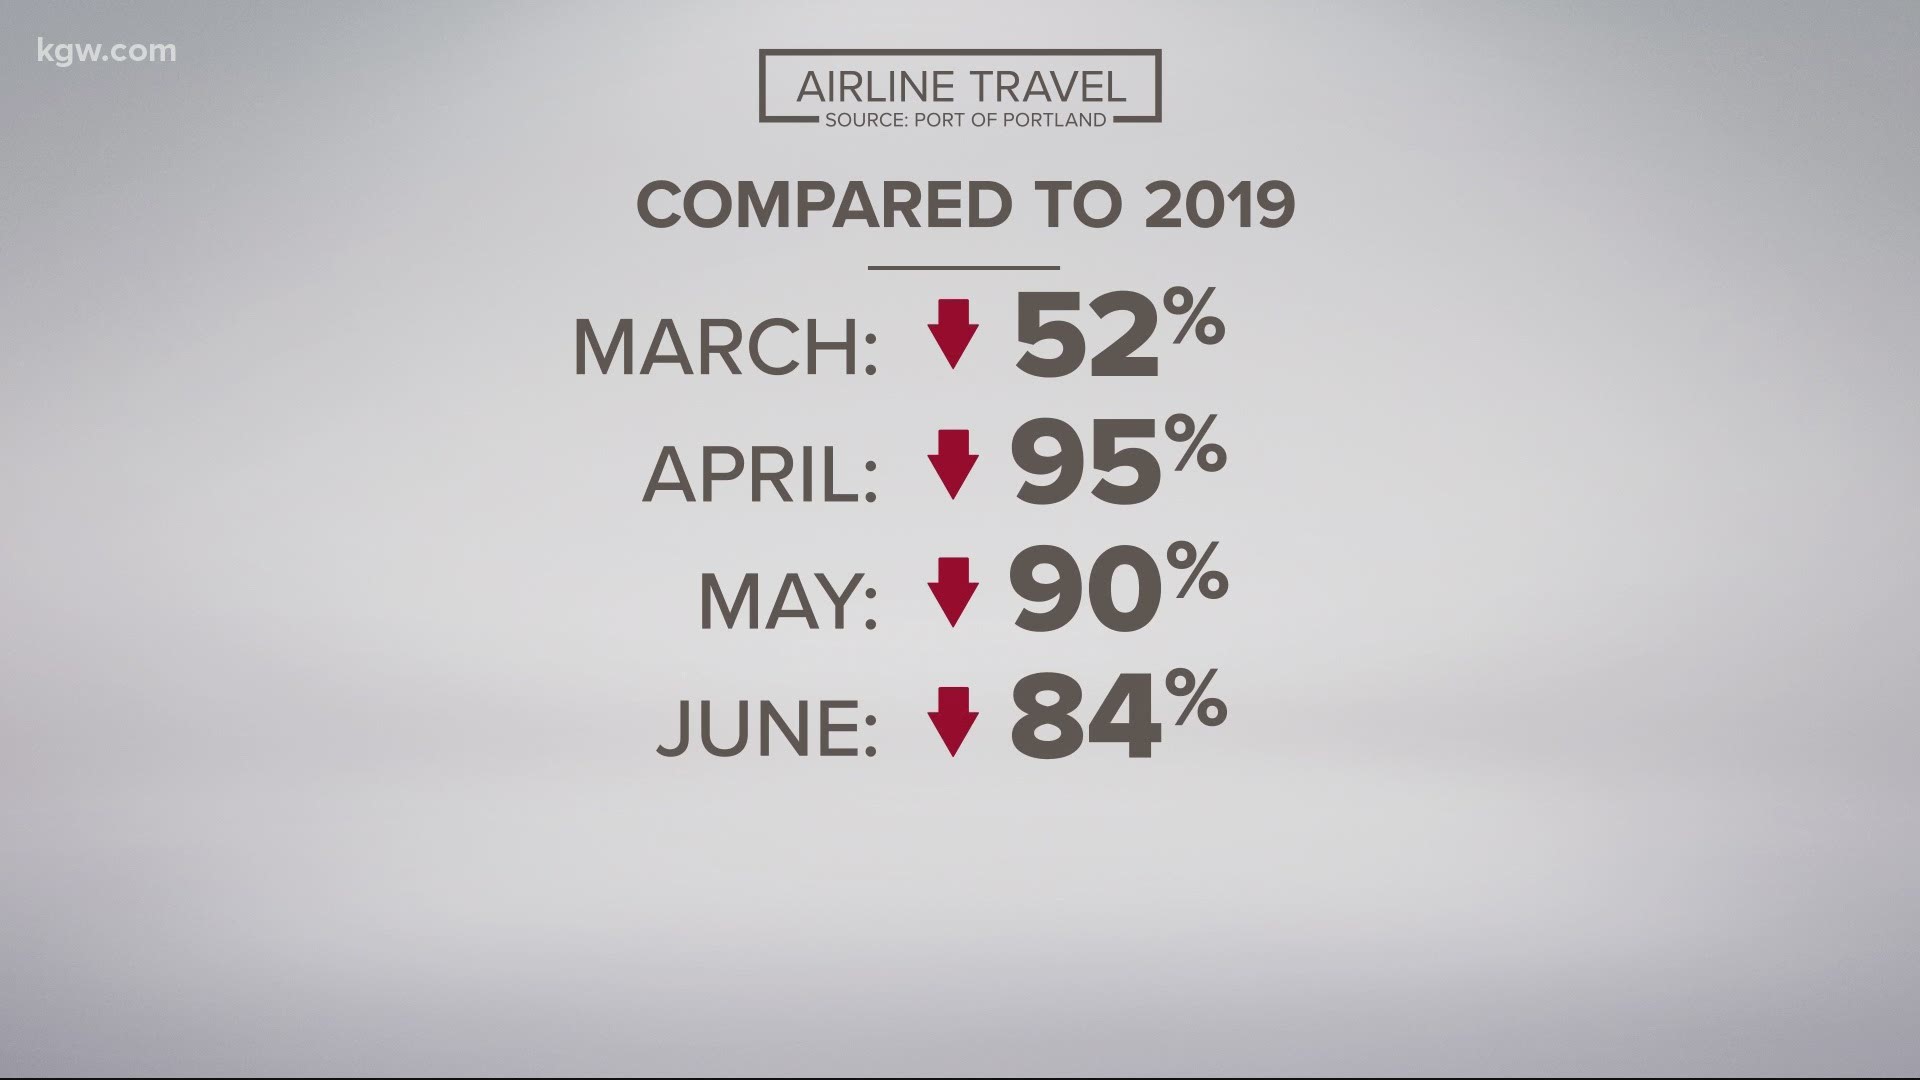 KGW's Ashley Korslien got some new numbers from Portland International Airport and talked with Alaska Airlines about new safety measures.